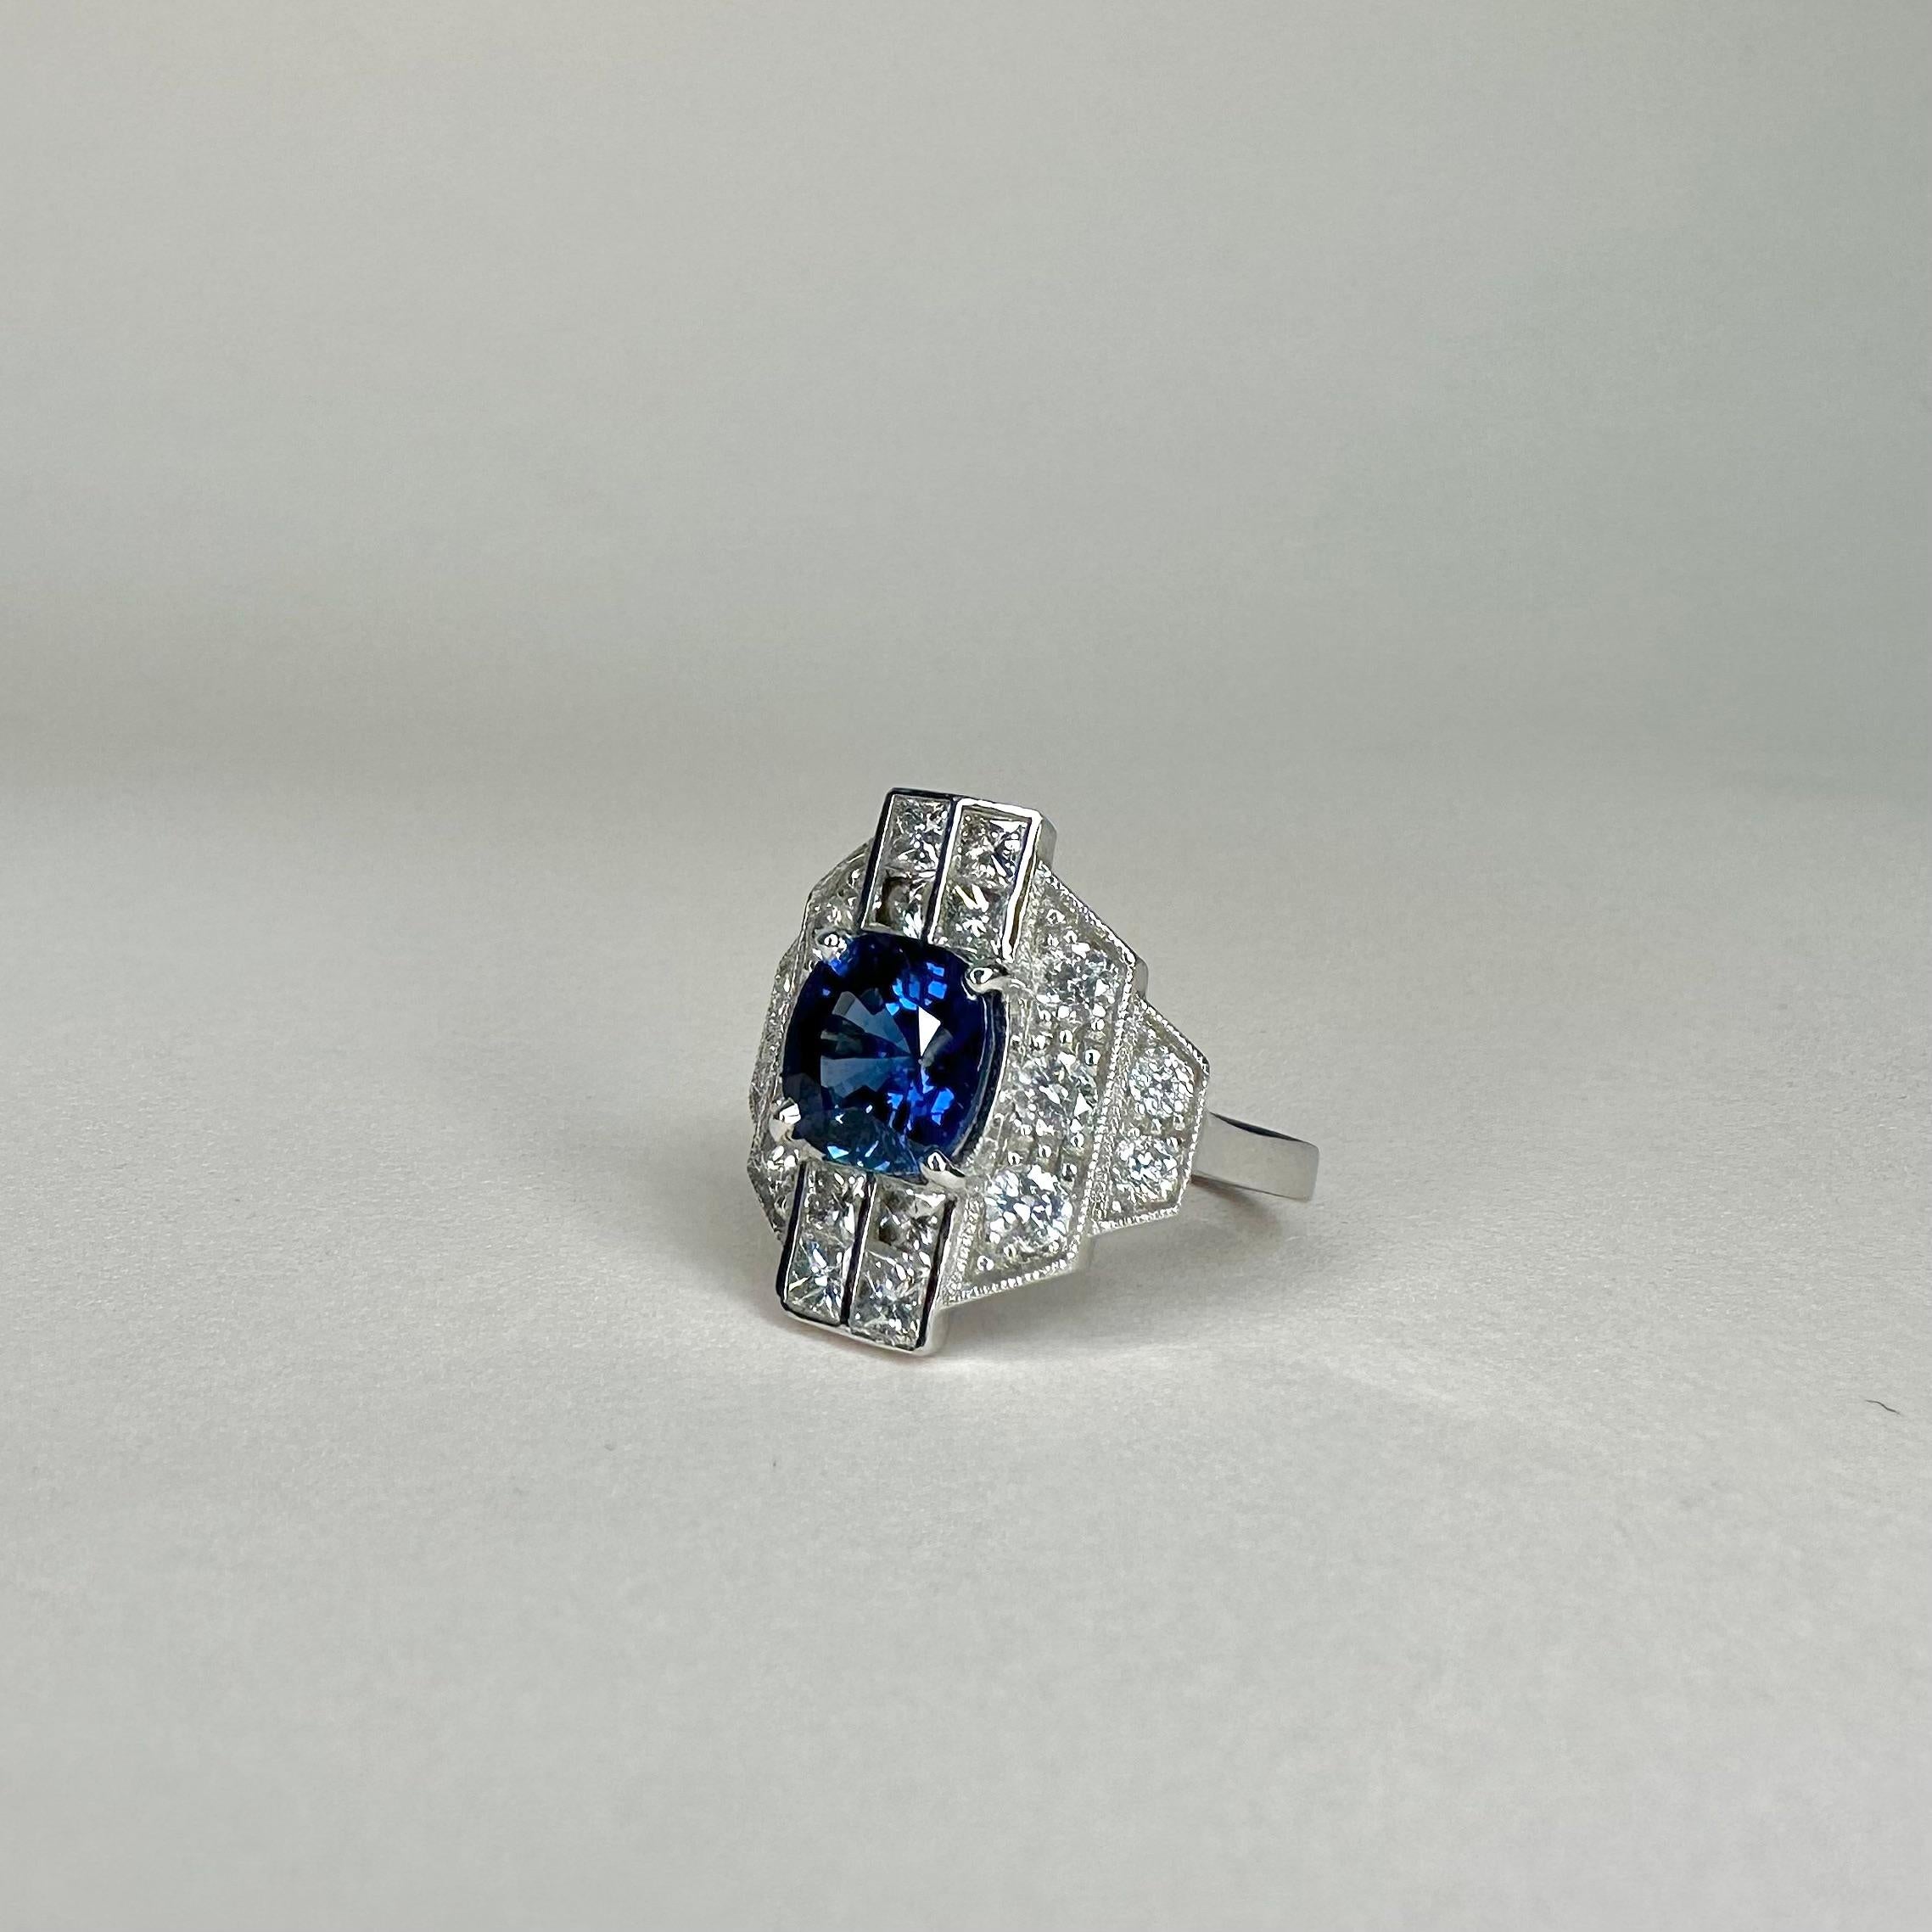 For Sale:  18k White Gold 2.65 Ct Royal Blue Cushion Sapphire Ring Set with 1.69 Ct Diamond 3